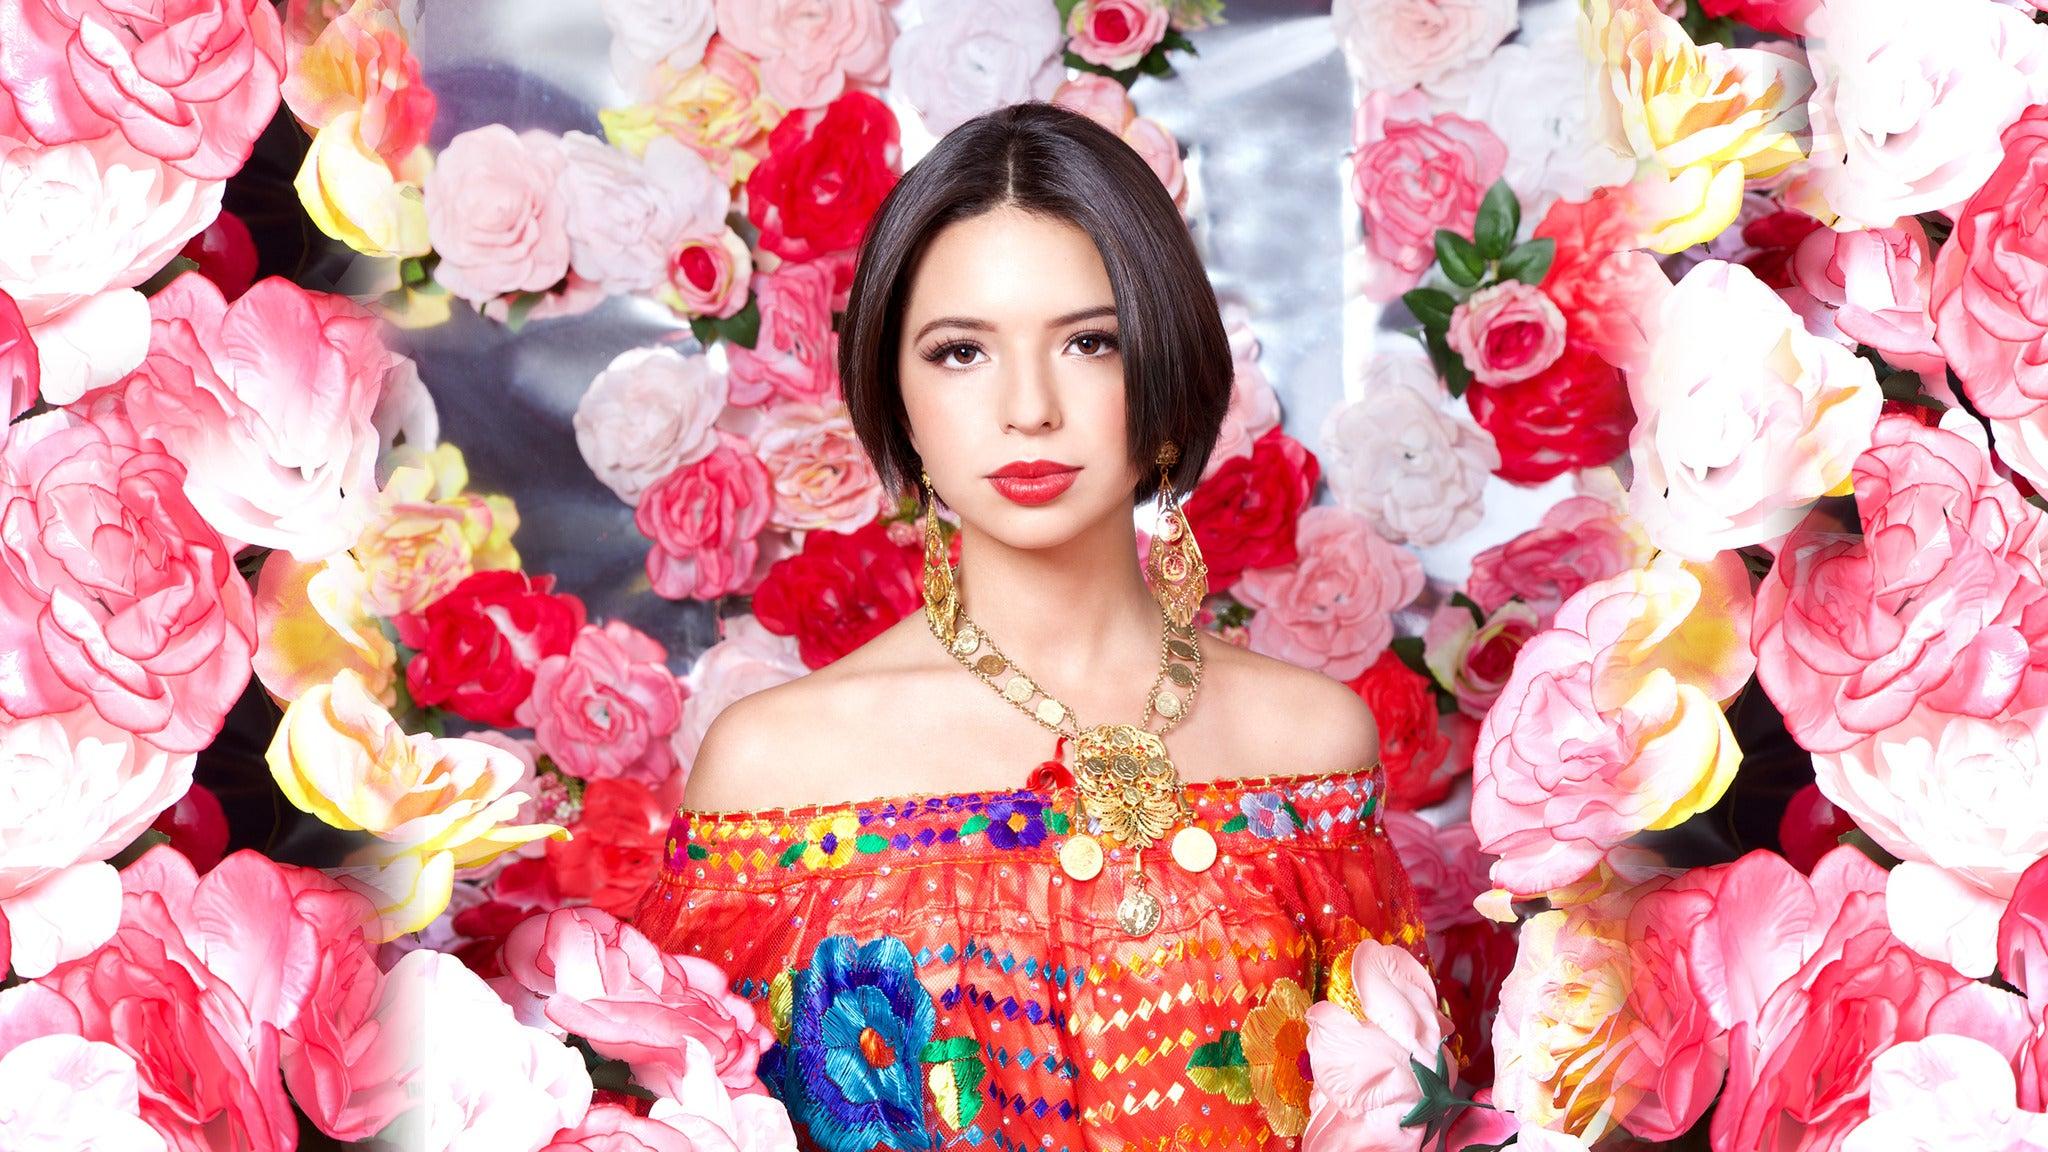 Angela Aguilar Wallpapers - Top Free Angela Aguilar Backgrounds ...